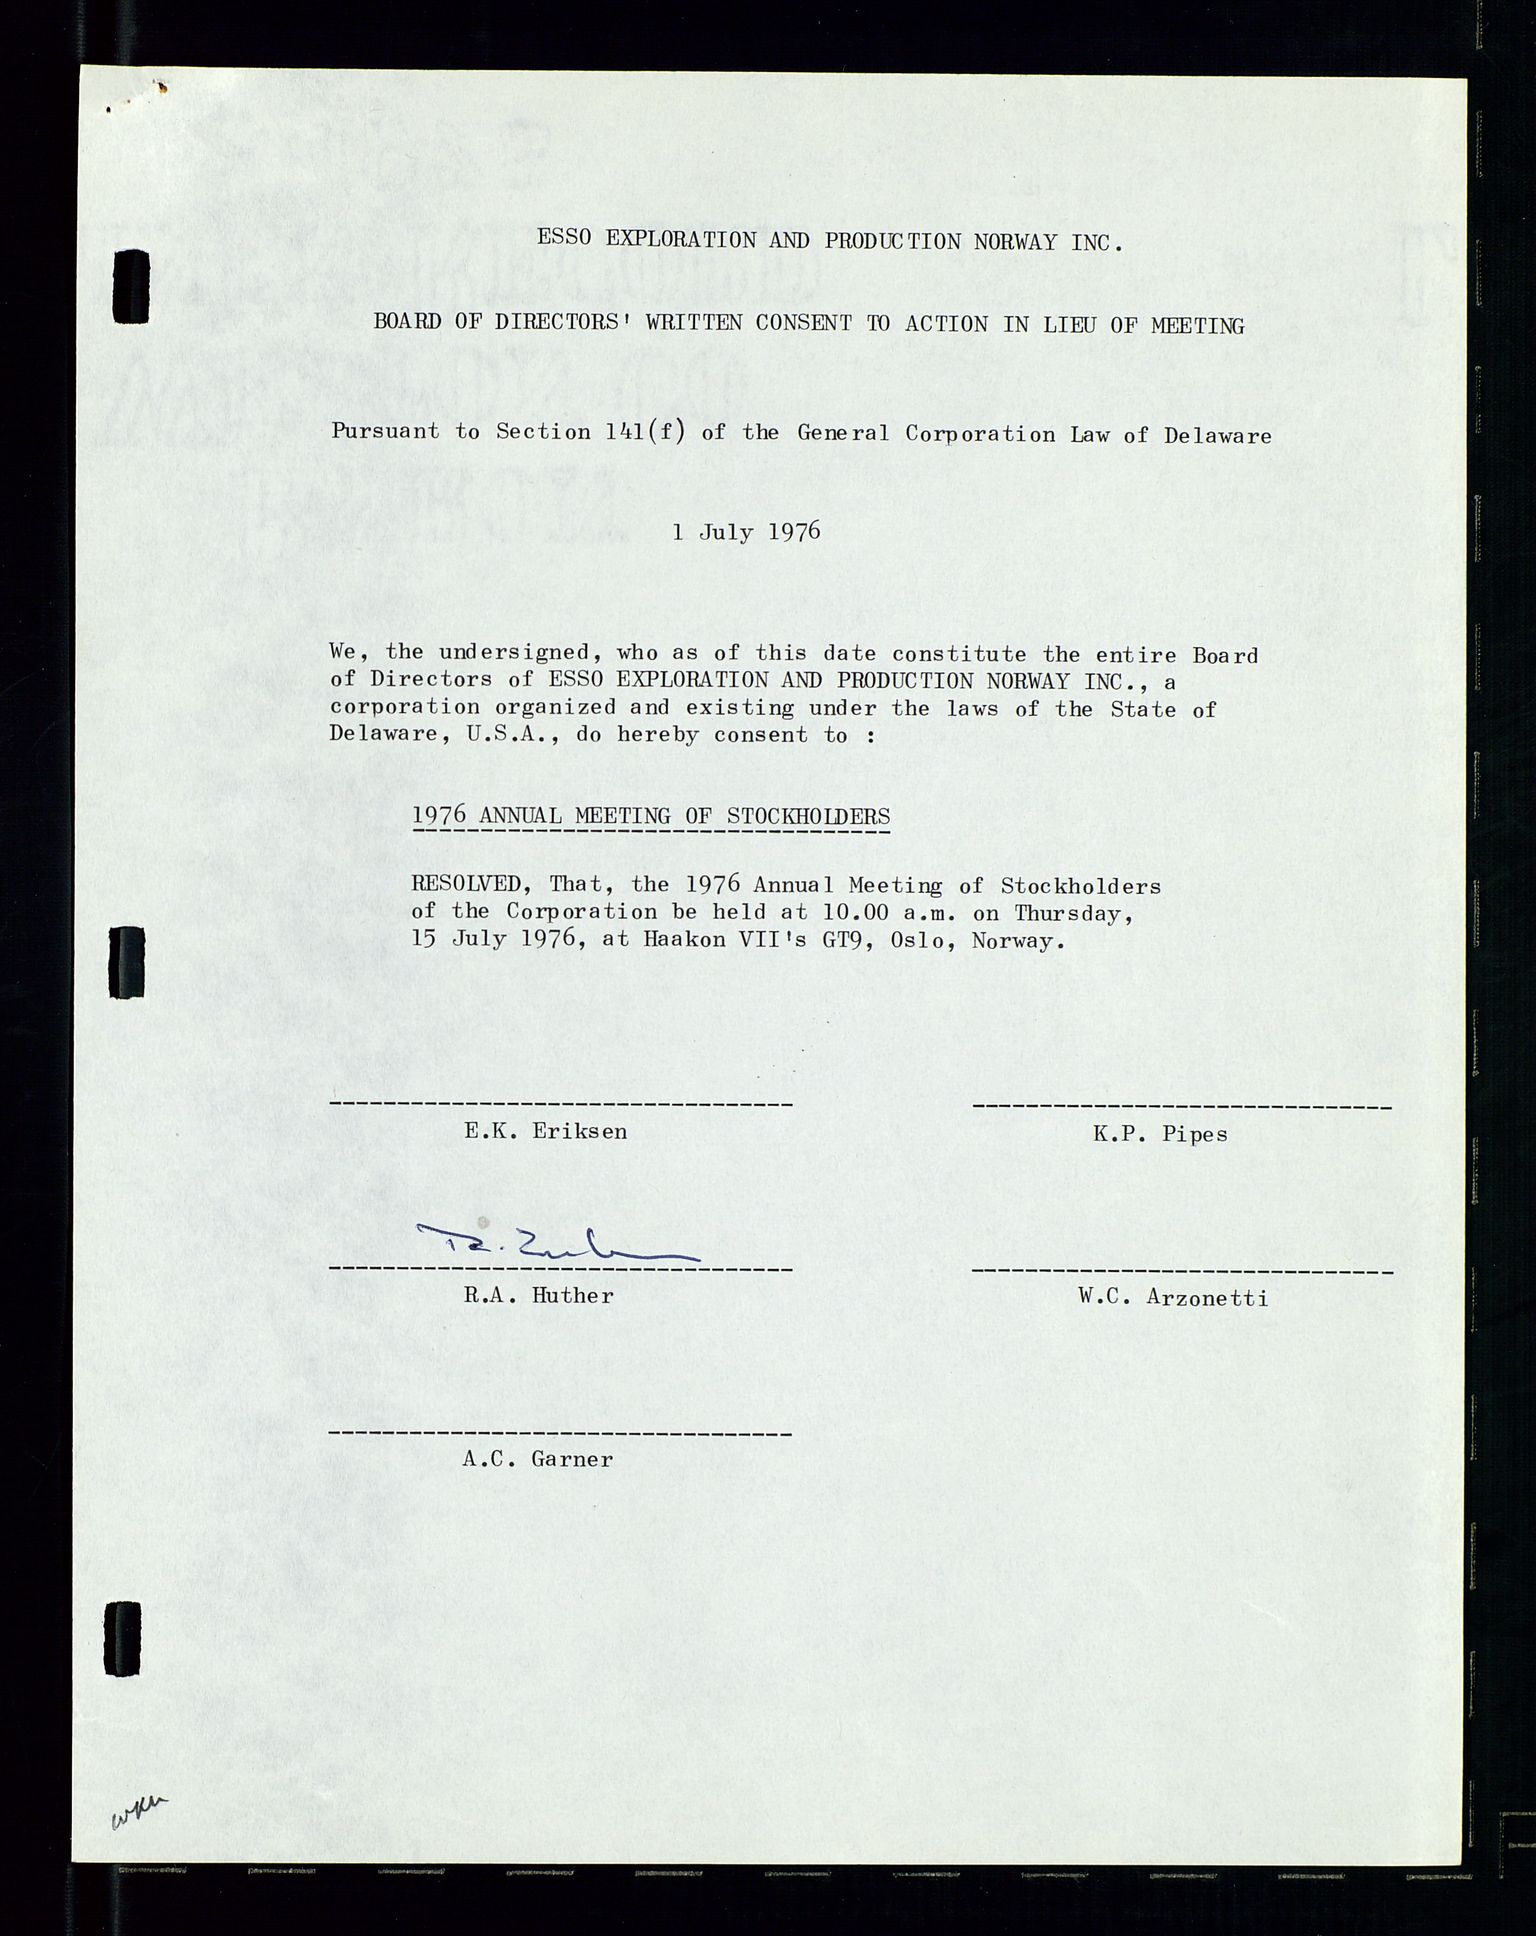 Pa 1512 - Esso Exploration and Production Norway Inc., SAST/A-101917/A/Aa/L0001/0002: Styredokumenter / Corporate records, Board meeting minutes, Agreements, Stocholder meetings, 1975-1979, p. 30